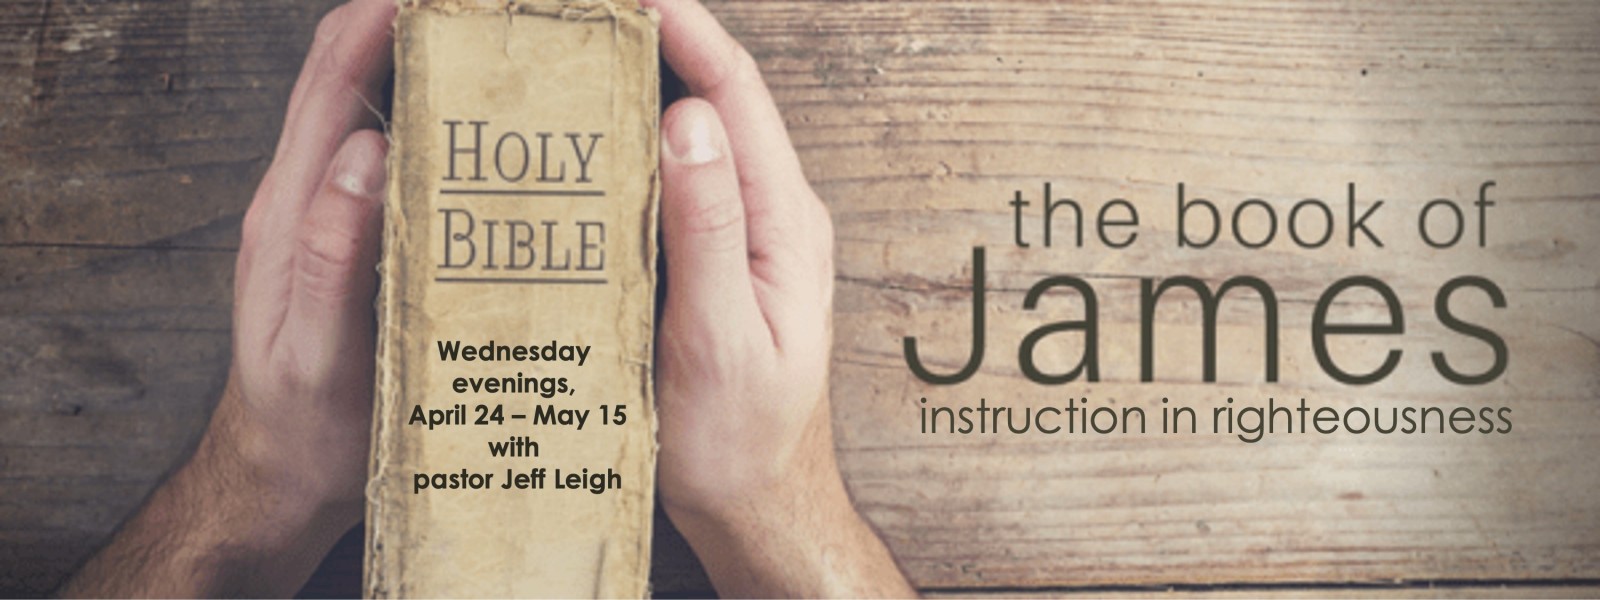 Wednesday Evening 4 week study, The Book of James - instruction in righteousness.